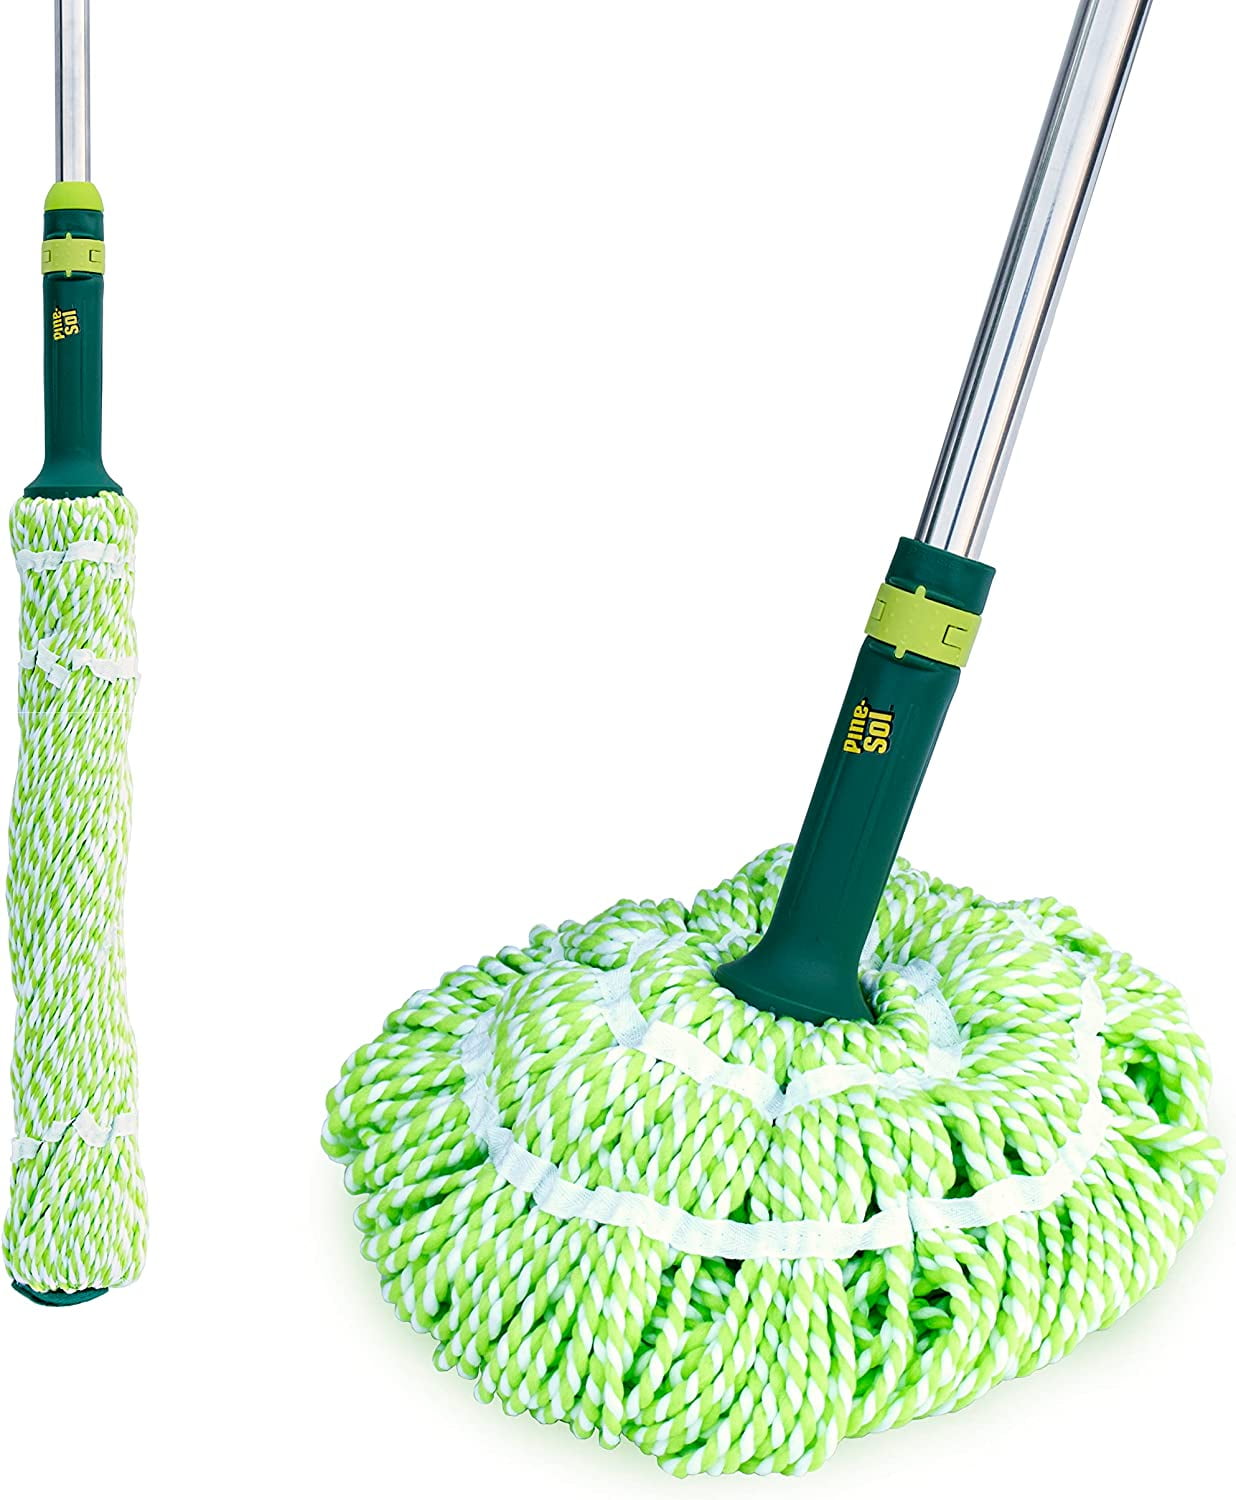  Self-Wringing Twist Mop for Floor Cleaning, Long